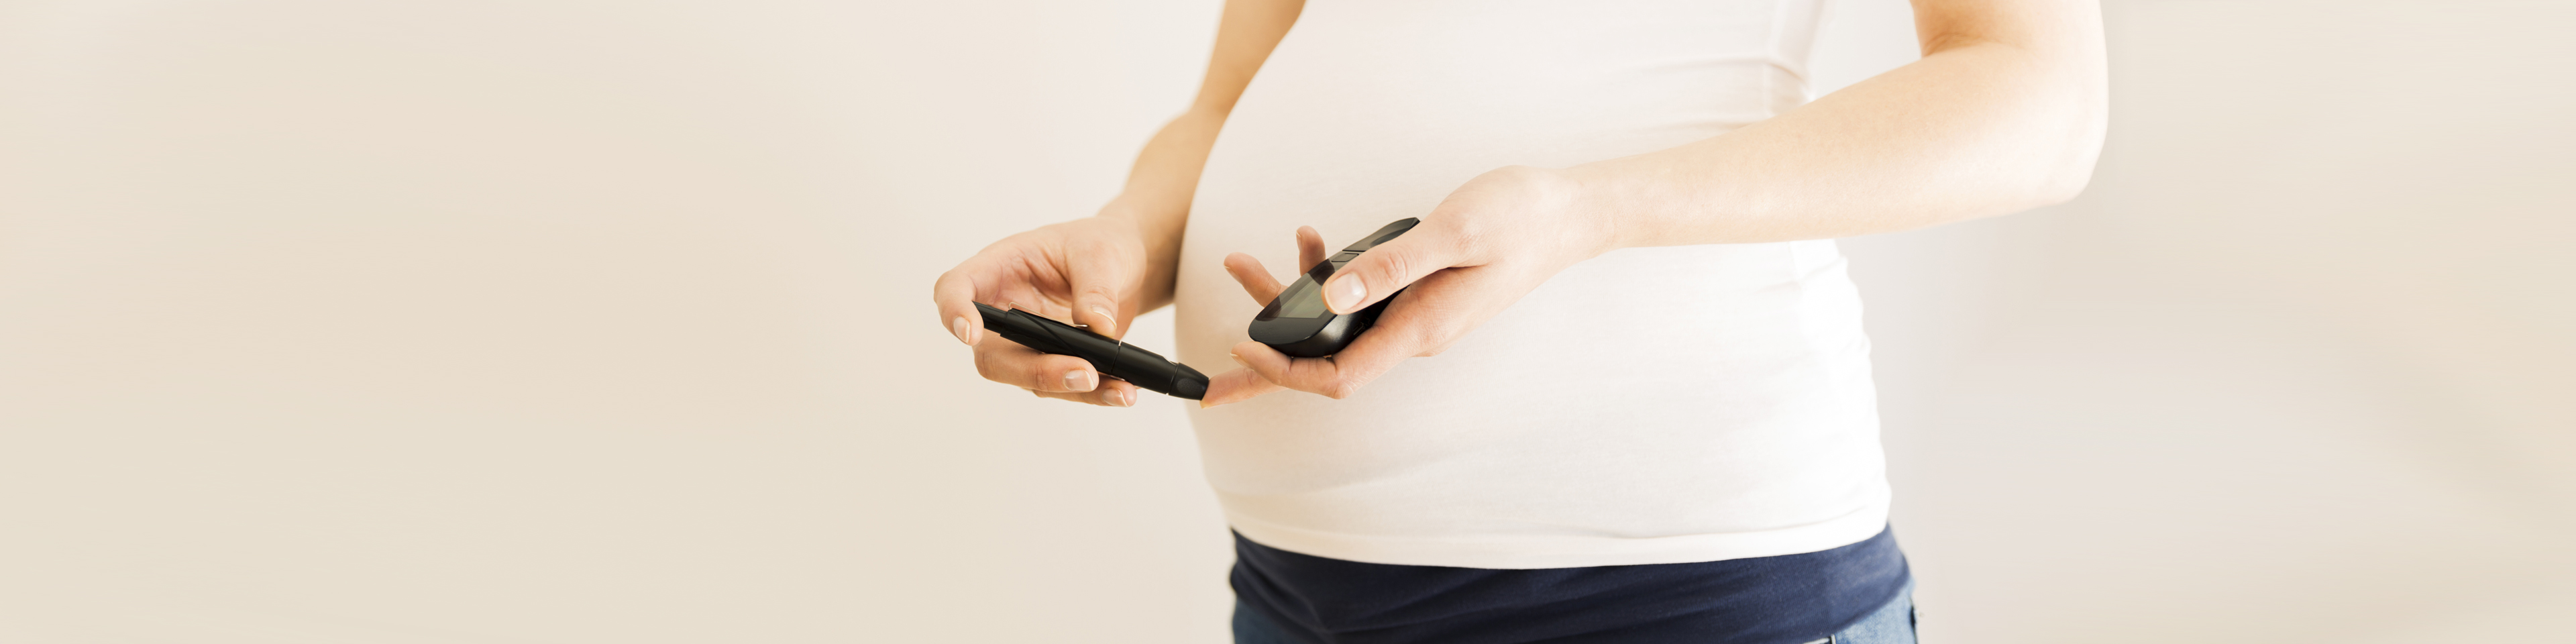 Pregnant woman with gestational diabetes checking blood sugar level